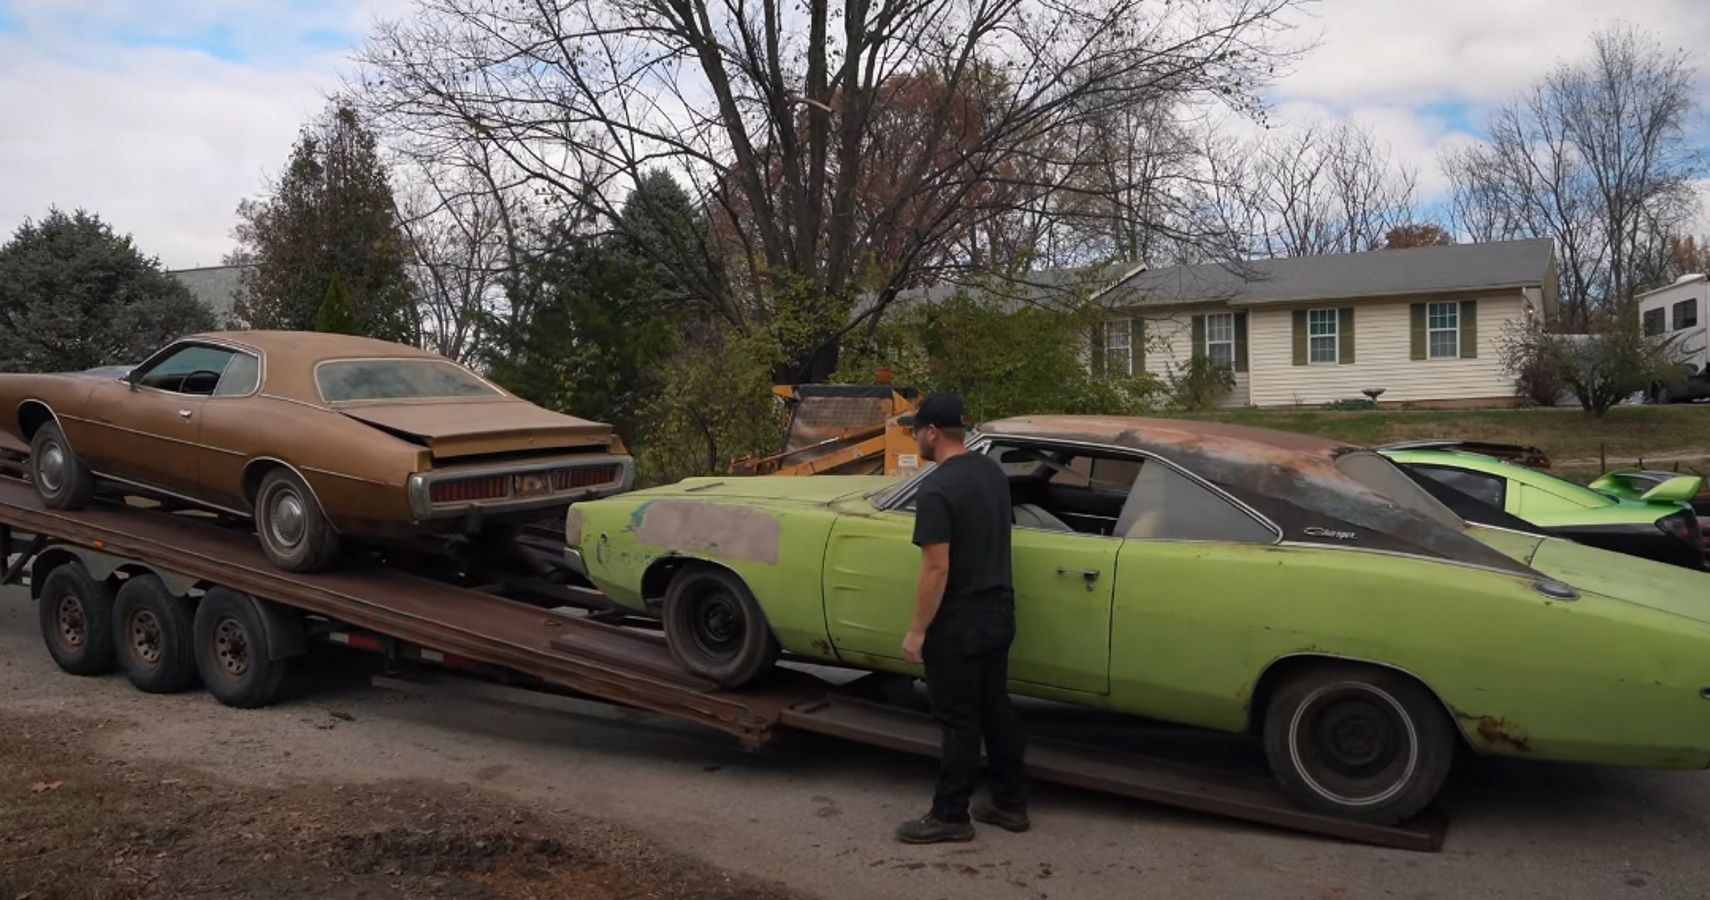 Dennis Collins Finds Hidden Treasure With This Pair Of Classic Dodge Chargers